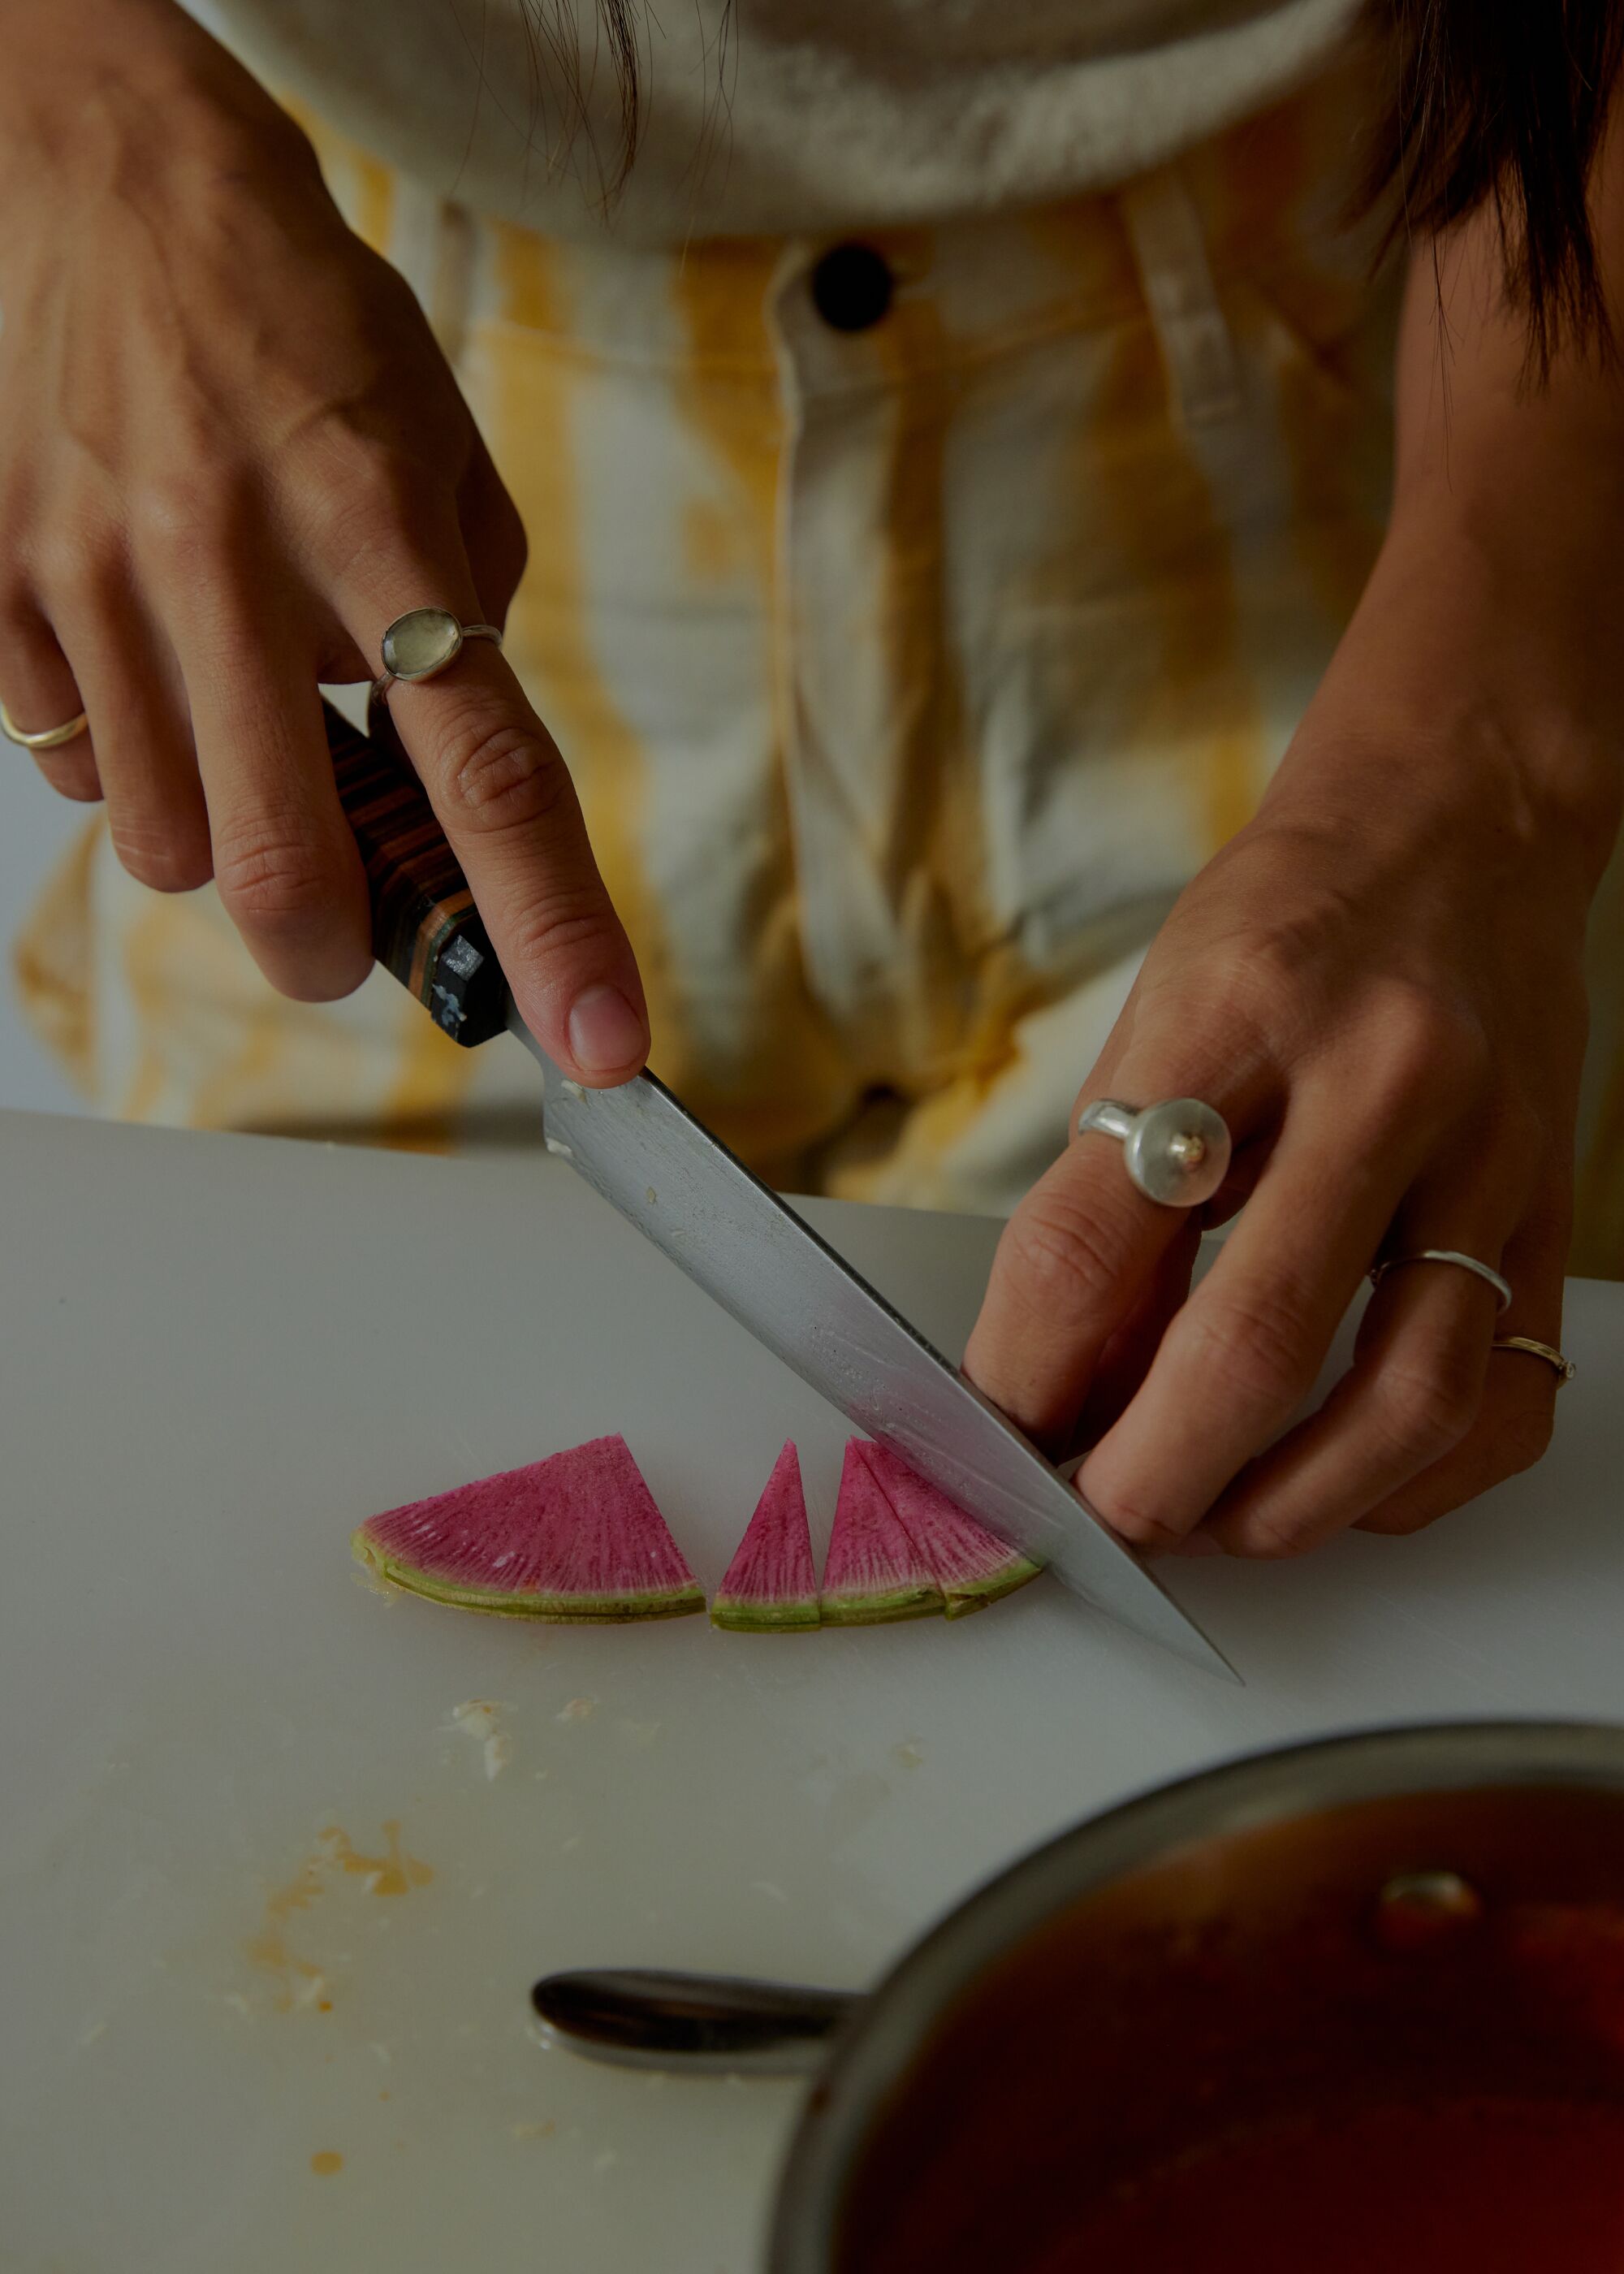 Watermelon radish, cut in petite triangles, as a topping for Ho's fish sauce congee.